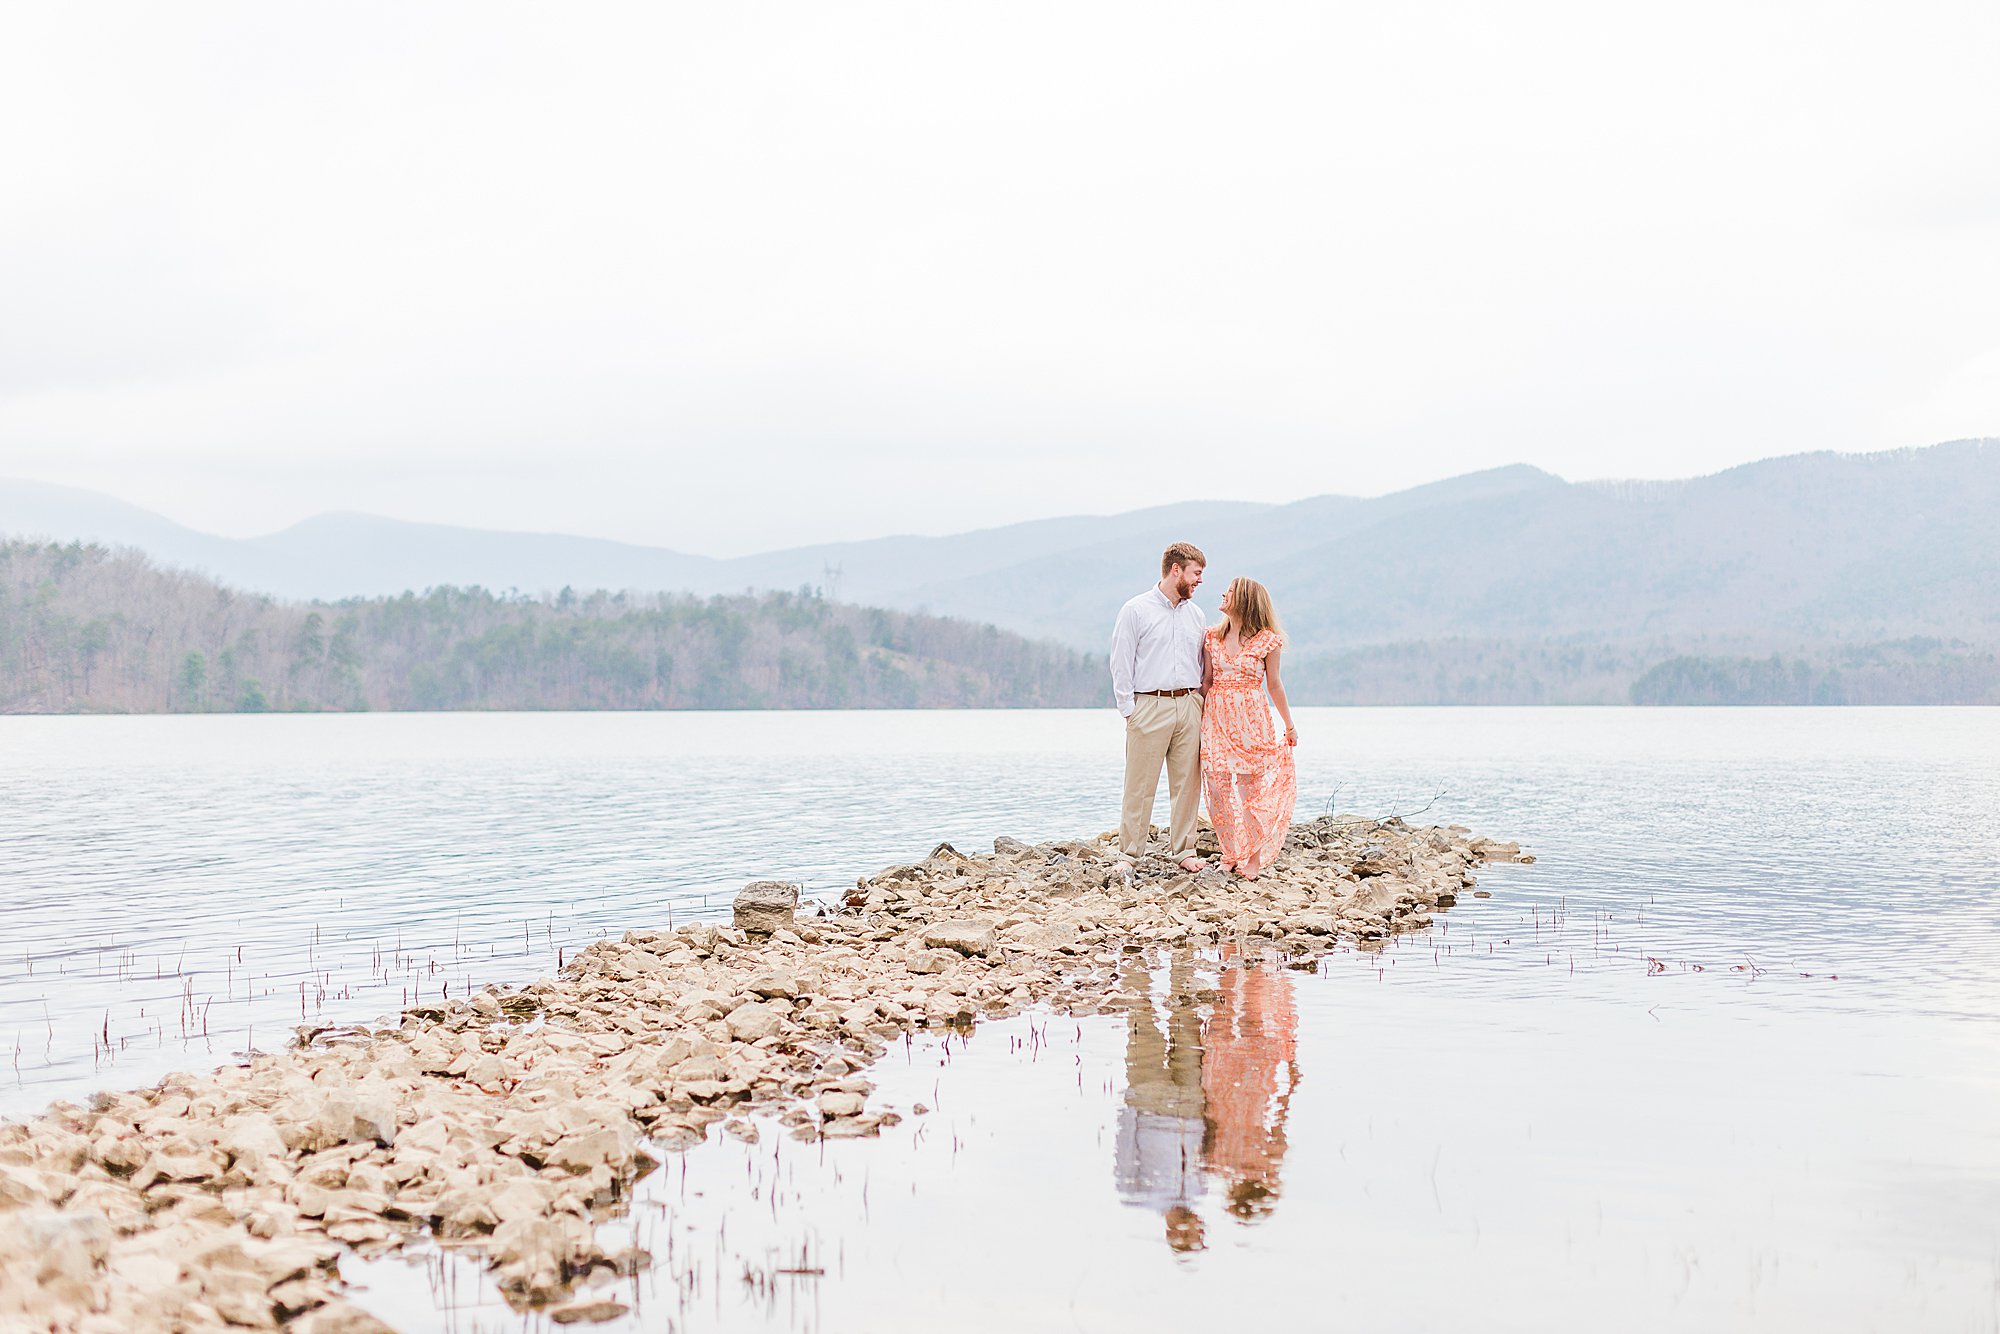 Engagement photos by lake in Charlottesville, VA>